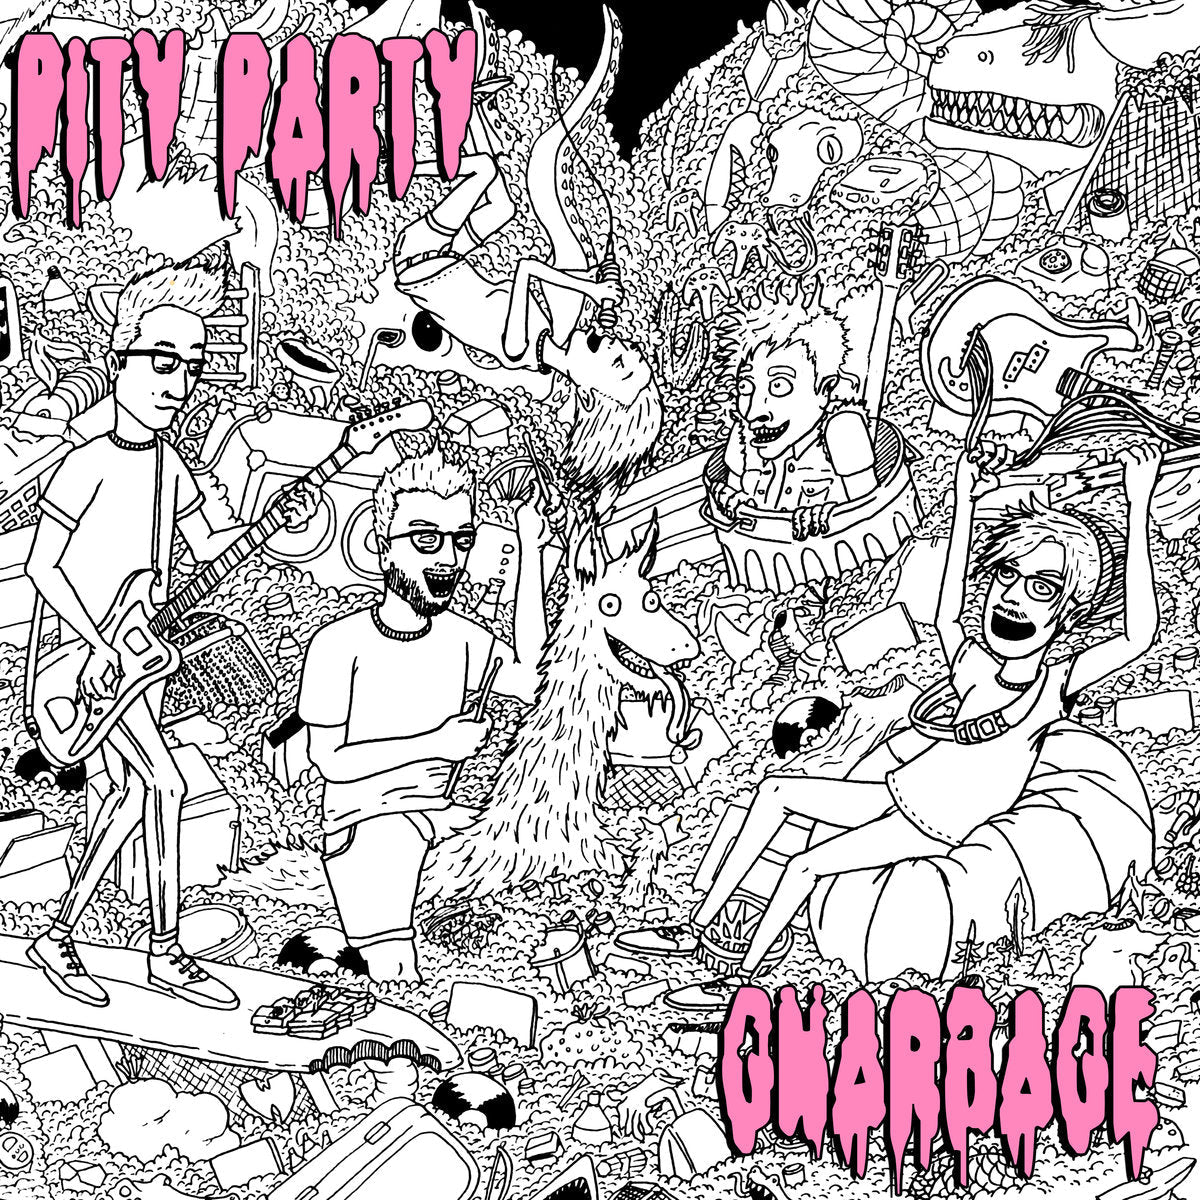 Pity Party - "Gnarbage" (Bent & Dent) - Acrobat Unstable Records